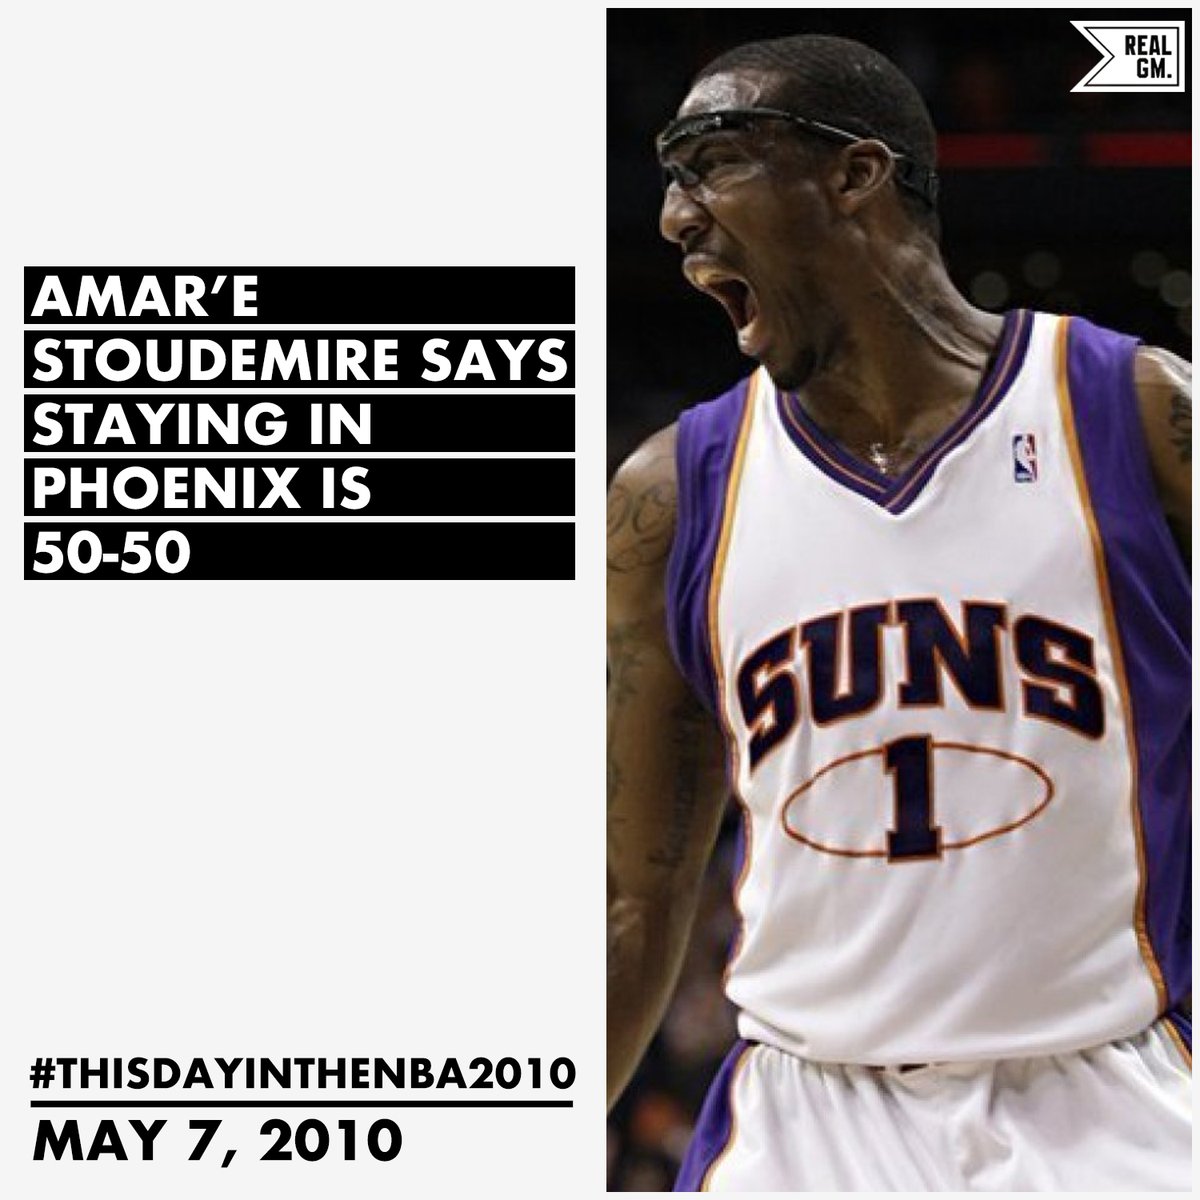  #ThisDayInTheNBA2010May 7, 2010Amar'e Stoudemire Says Staying In Phoenix Is 50-50 https://basketball.realgm.com/wiretap/203749/Amare-Stoudemire-Says-Staying-In-Phoenix-Is-50-50